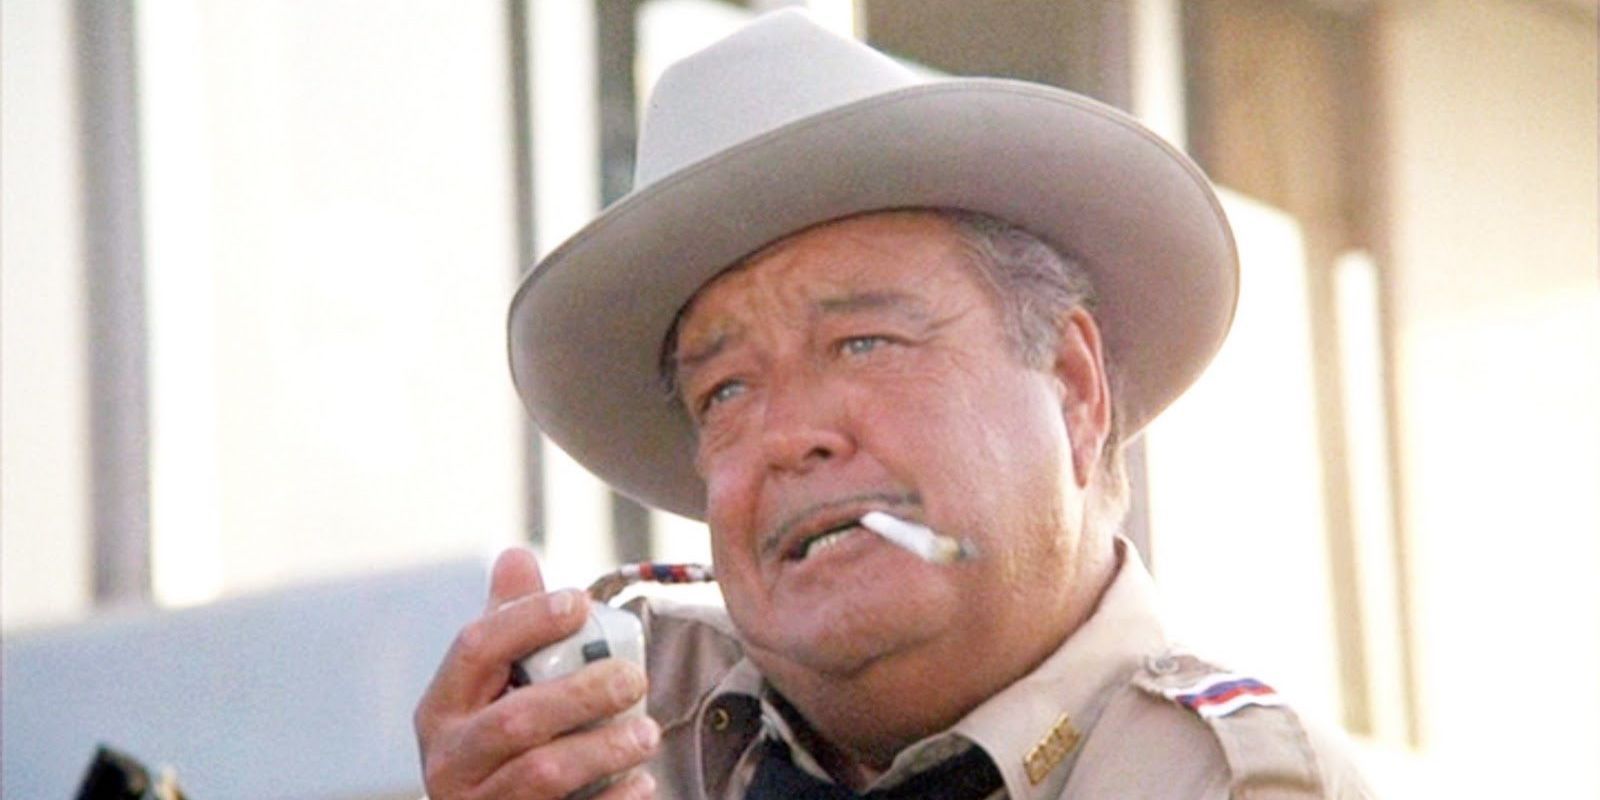 Sheriff Buford T. Justice on the radio in Smokey and the Bandit